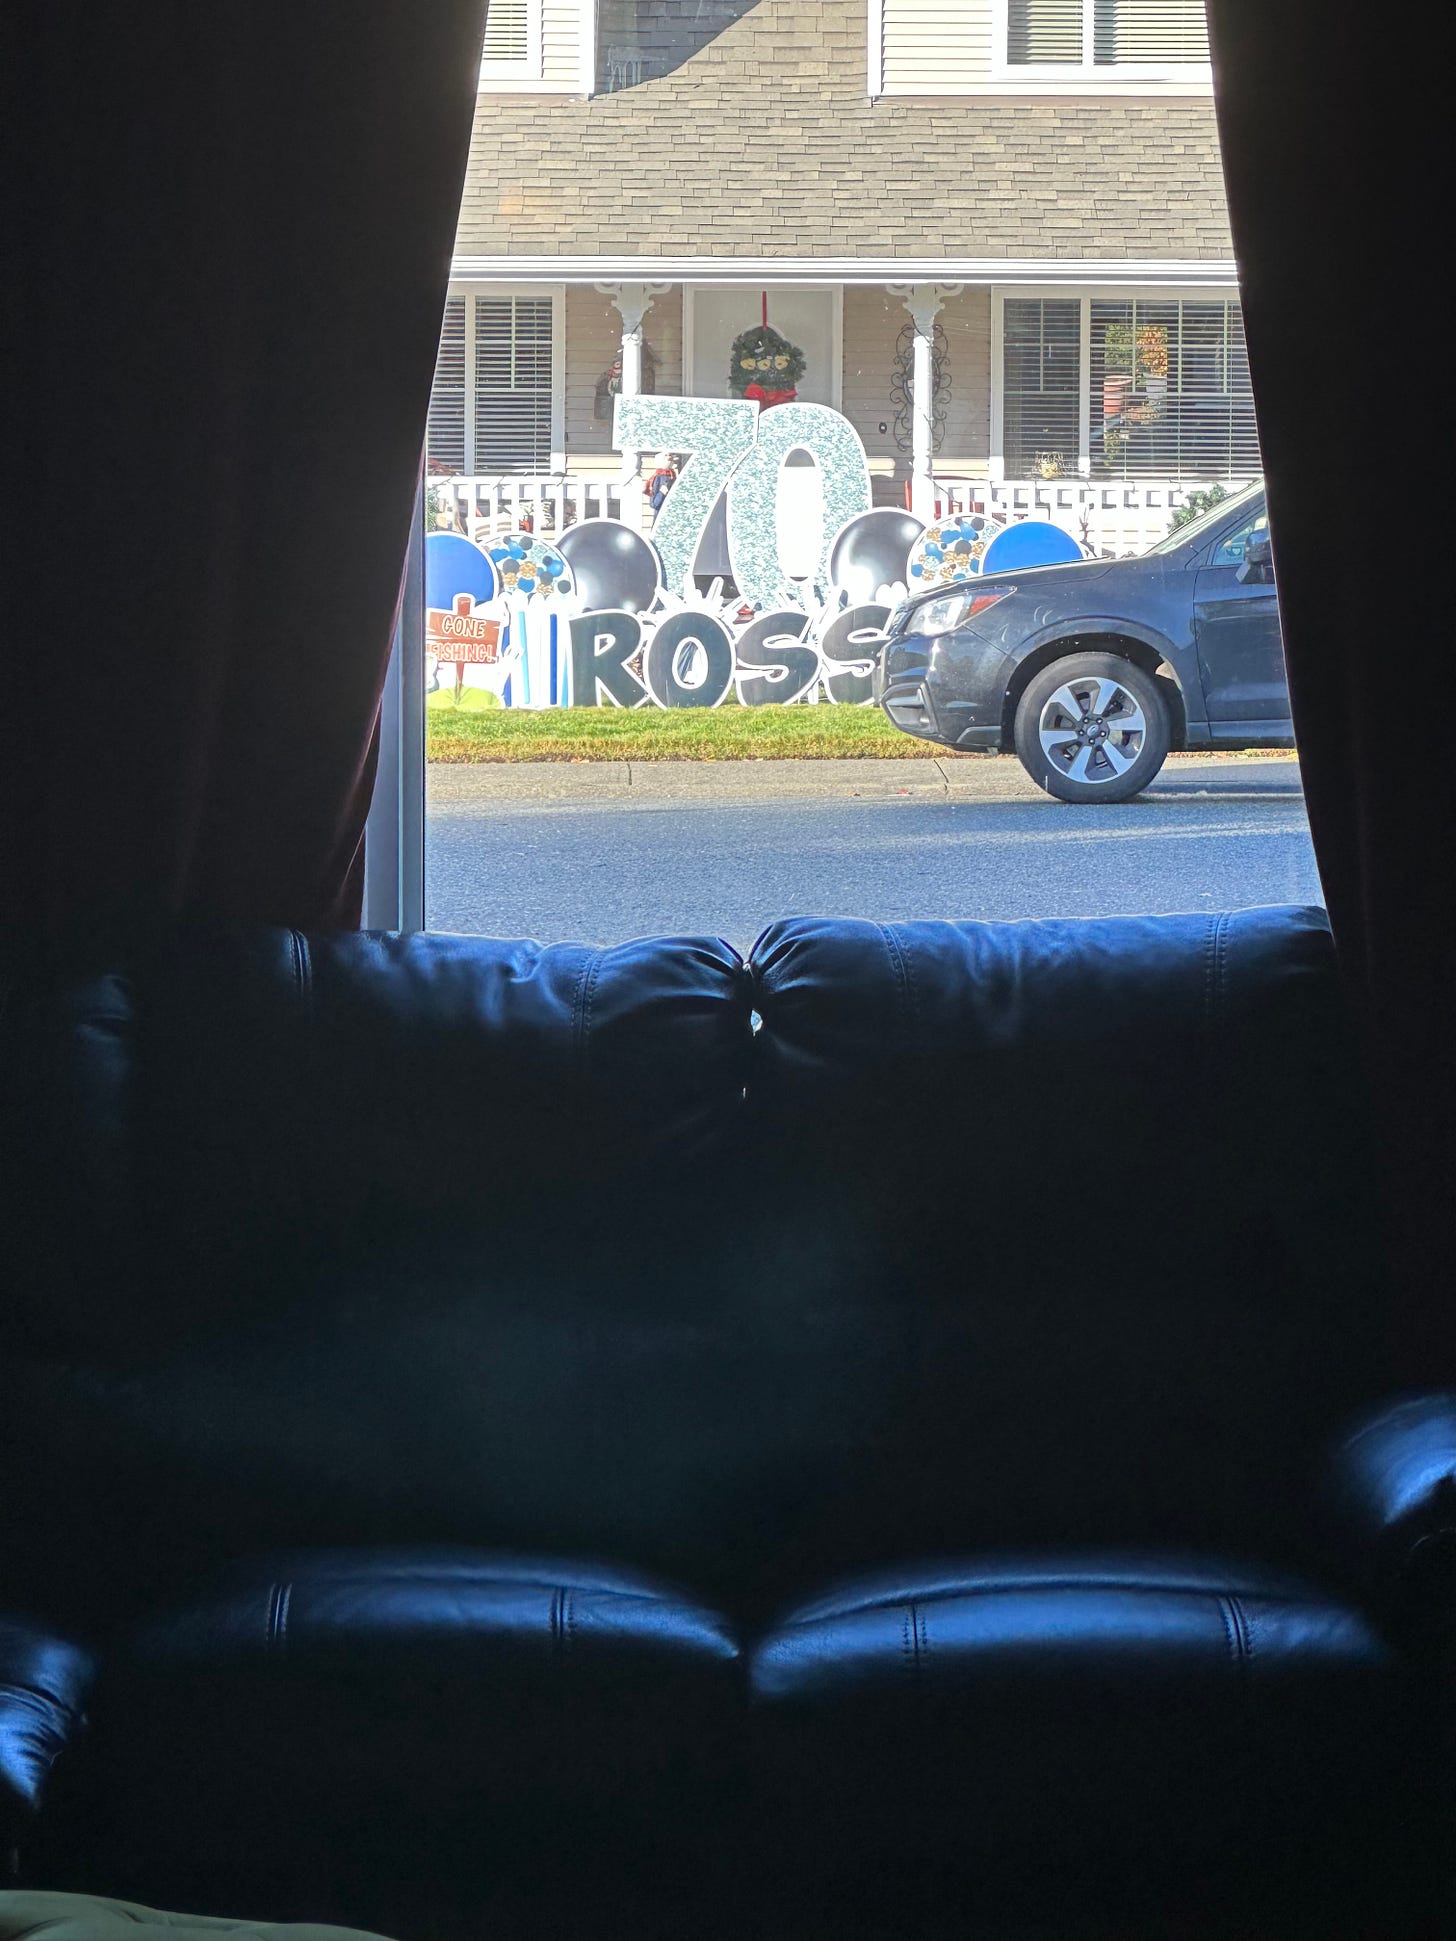 A gigantic display of love and affection seen from the window of my living room on my neighbours’ front lawn that shouts 70! ROSS! featuring black and blue likenesses of balloons.